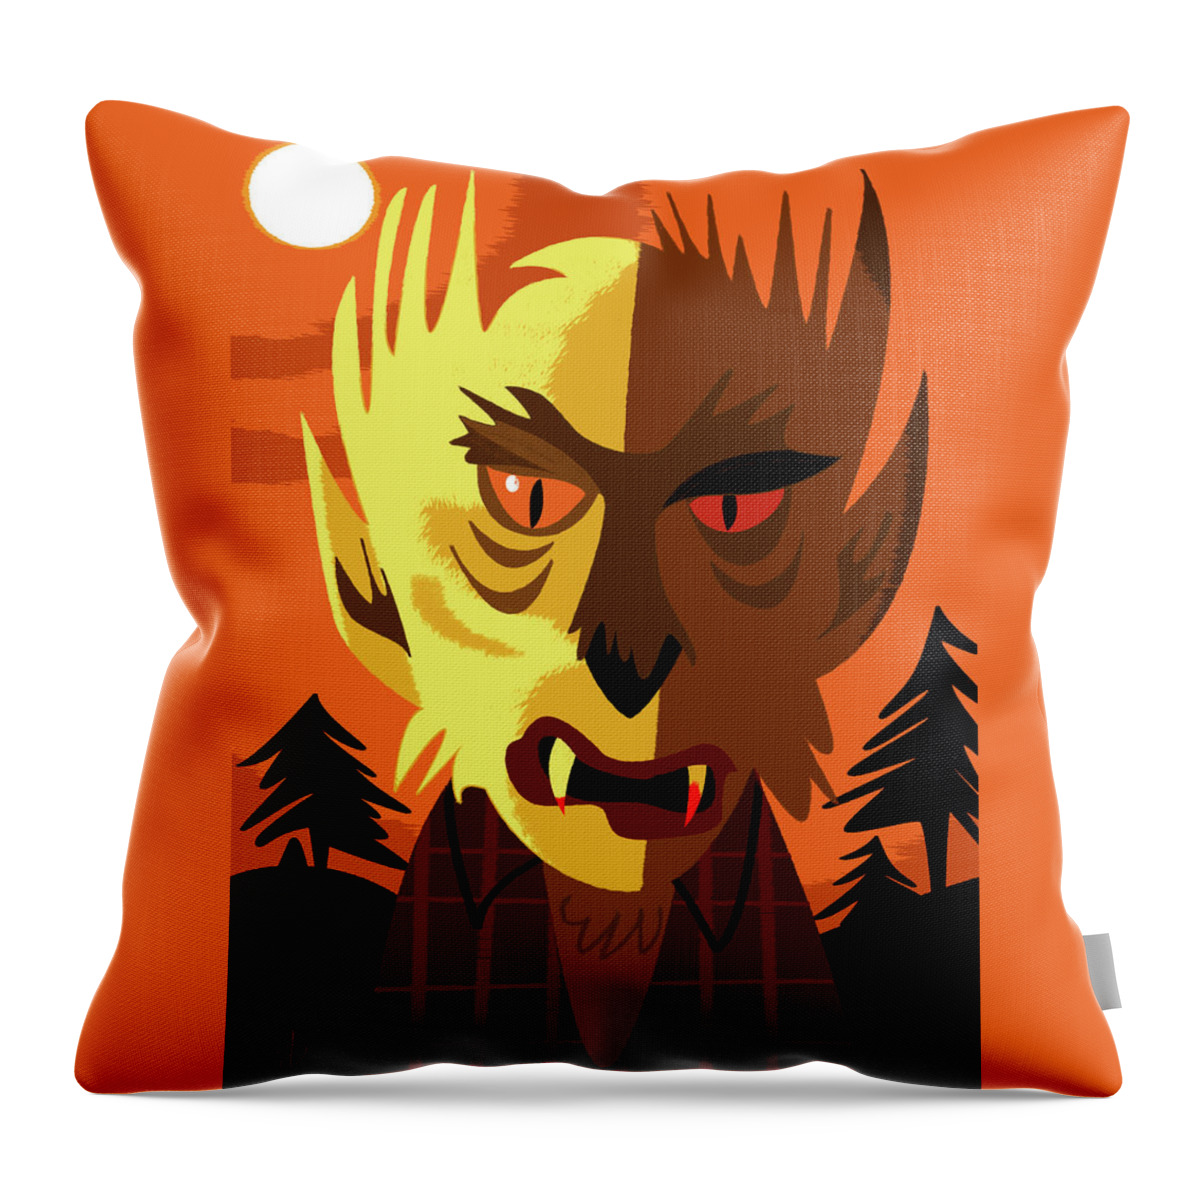 Wolfman Throw Pillow featuring the digital art The Wolfman by Alan Bodner